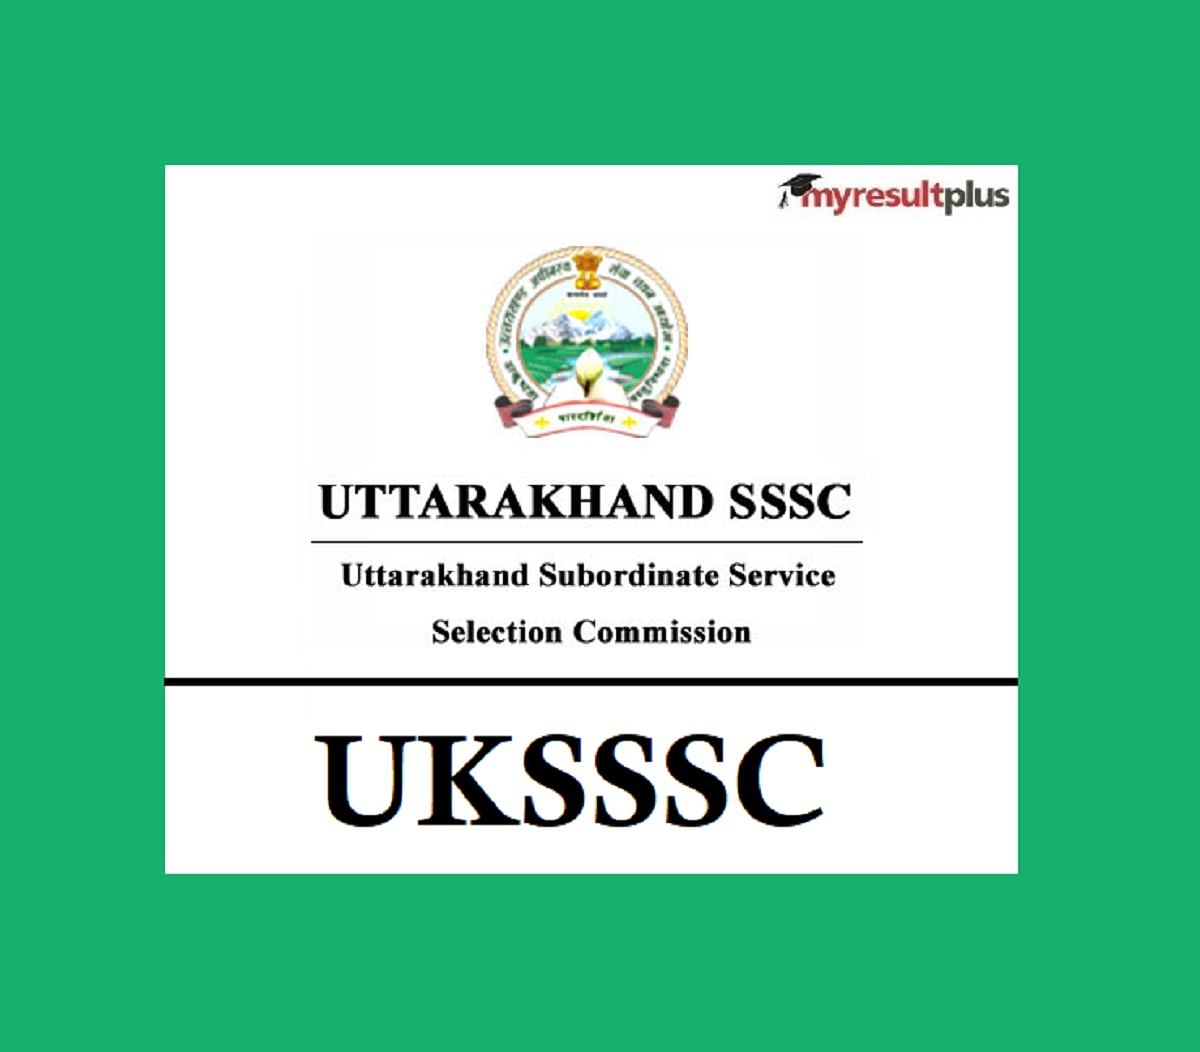 UKSSSC Recruitment 2022: Few Hours Left to Apply for 272 Chief Constable Posts, Direct Link to Apply Here